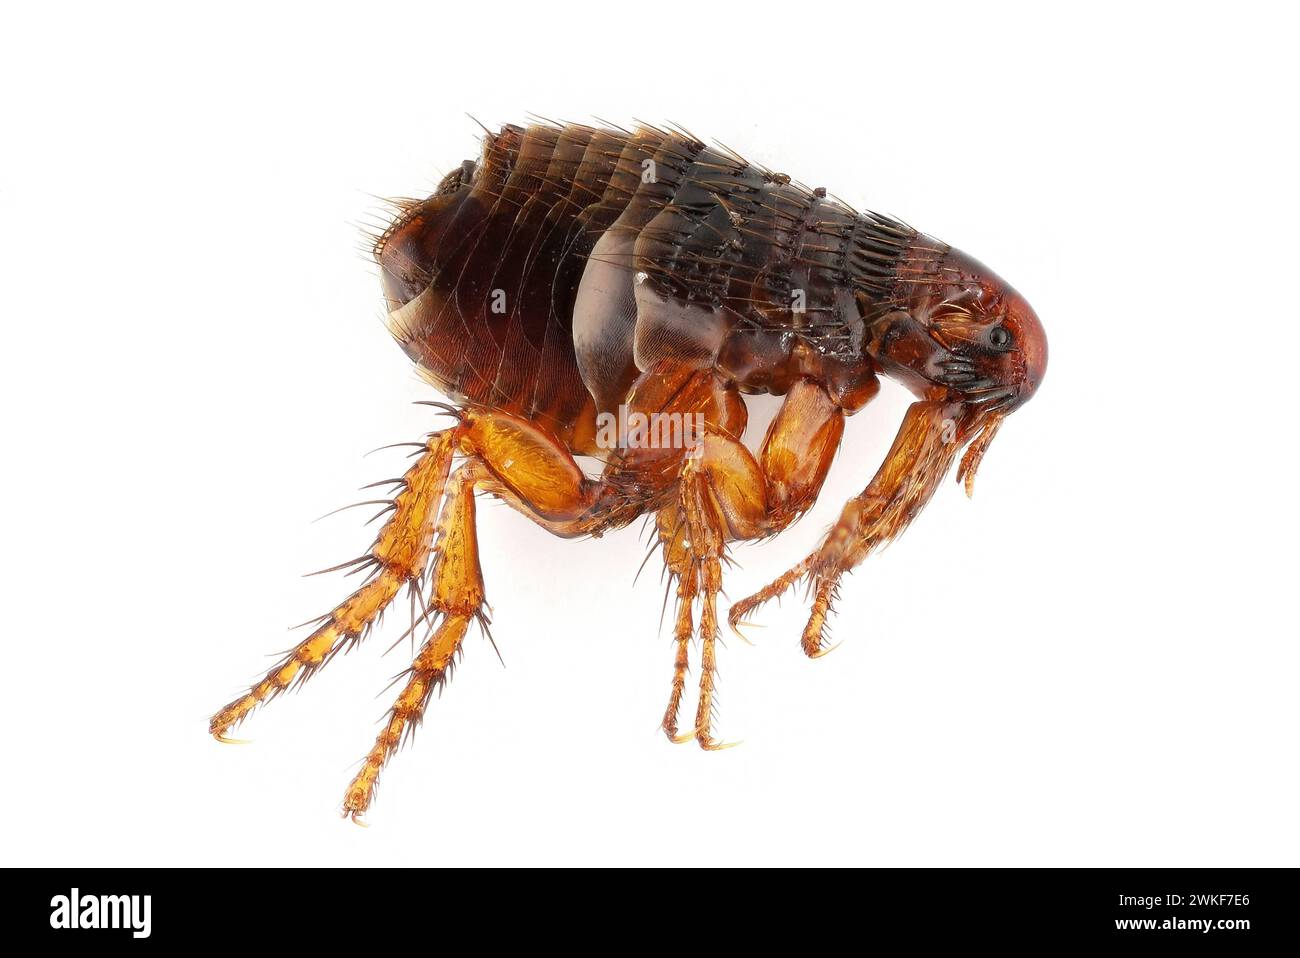 Flea on a white background close-up. A troublesome parasite of domestic animals and humans. A carrier of disease causing microorganisms. Stock Photo